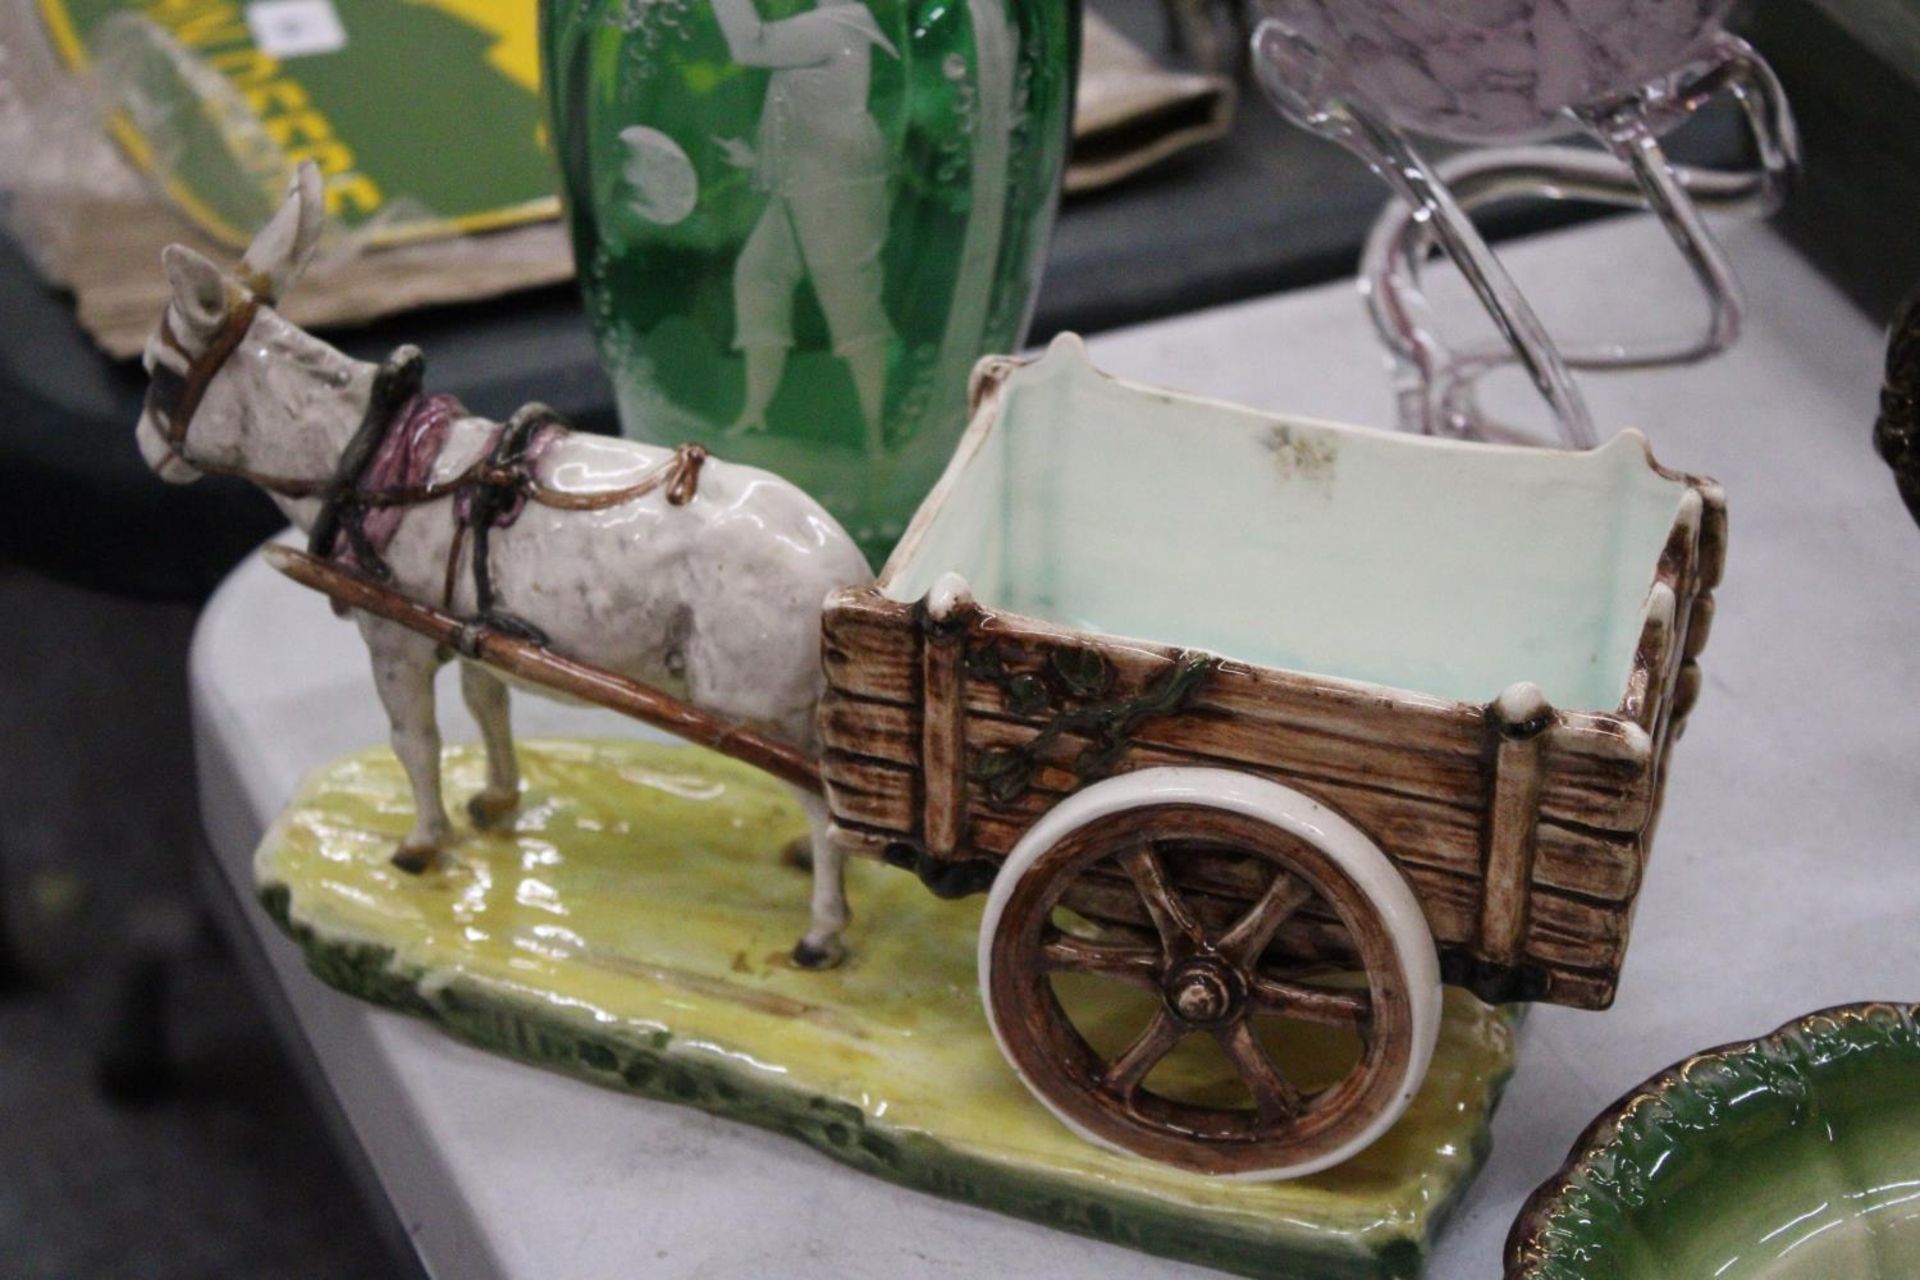 A VINTAGE GREEN MARY GREGORY JUG - A/F, A PIECE OF ART GLASS, CERAMIC DONKEY AND CART PLUS A FRUIT - Image 4 of 5